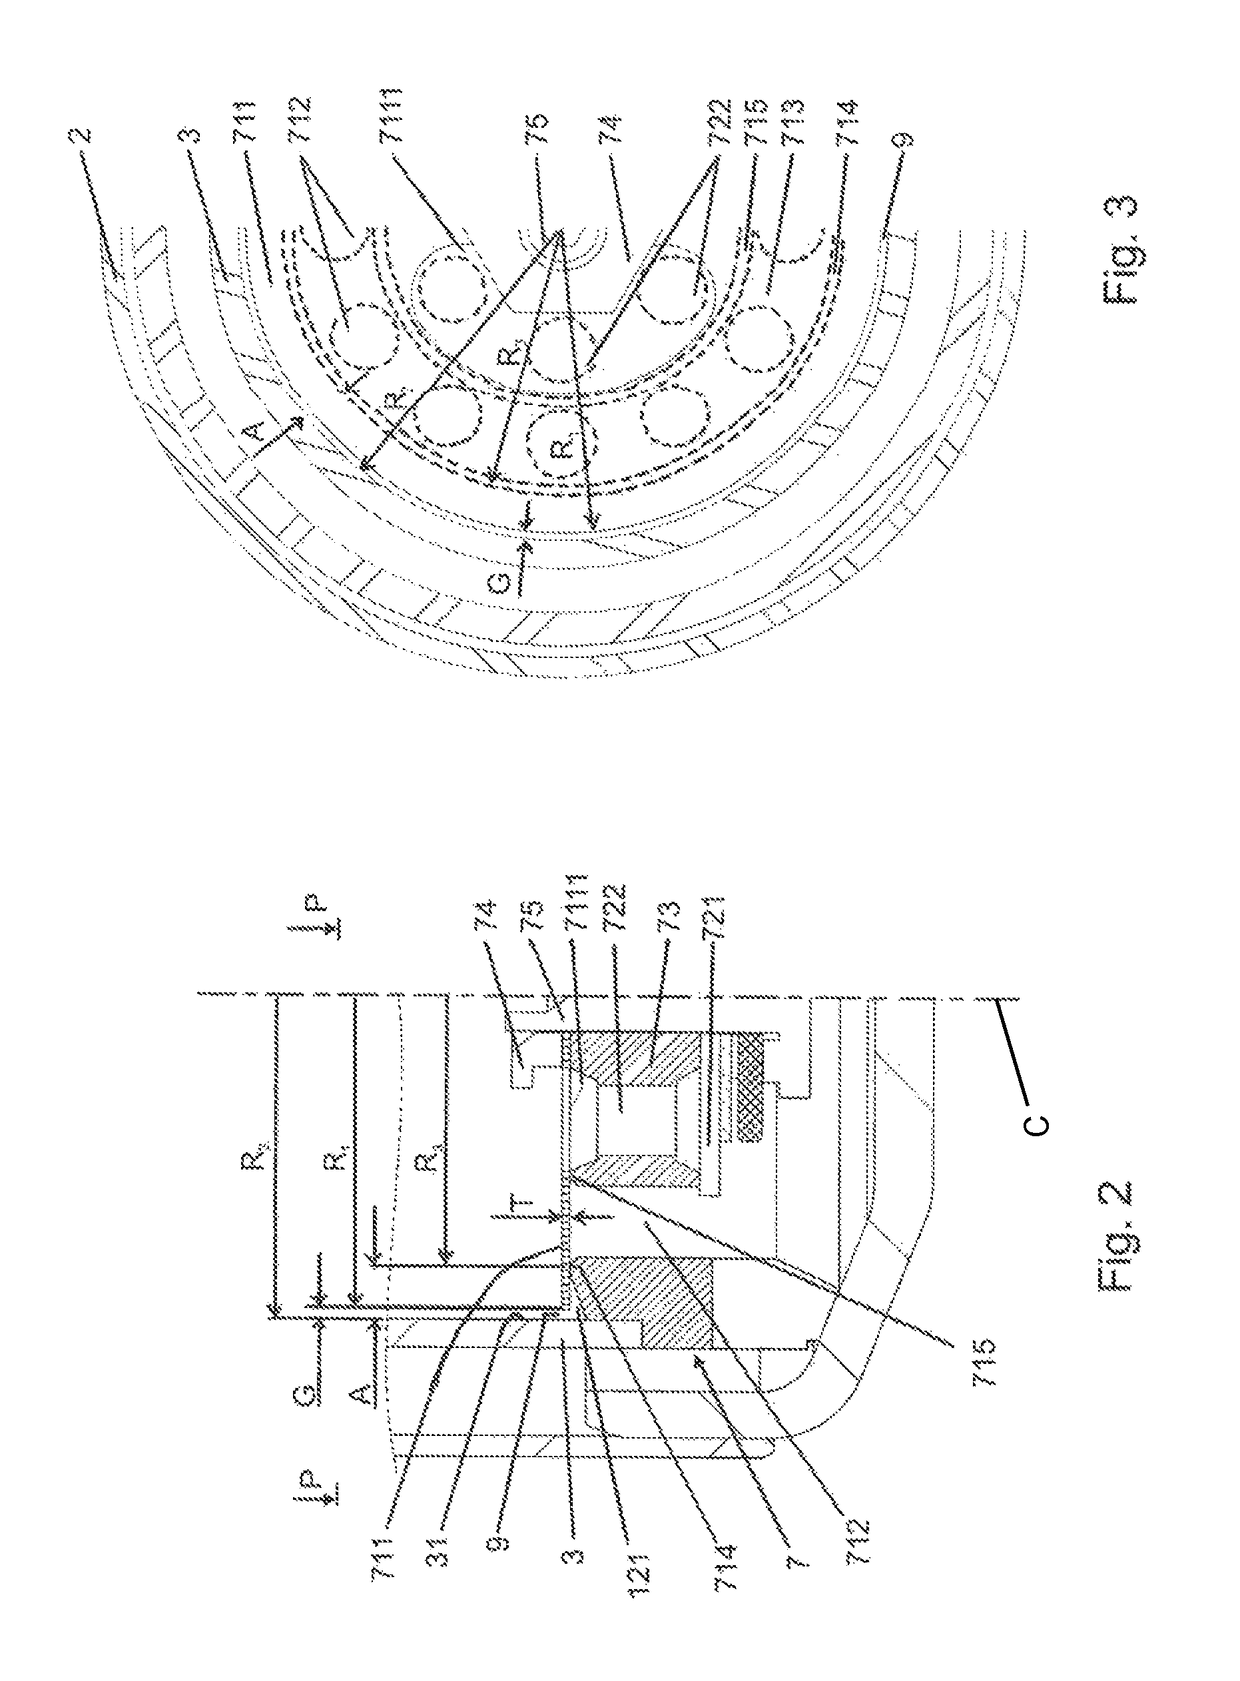 Twin-tube hydraulic damper with a vibration suppressing device